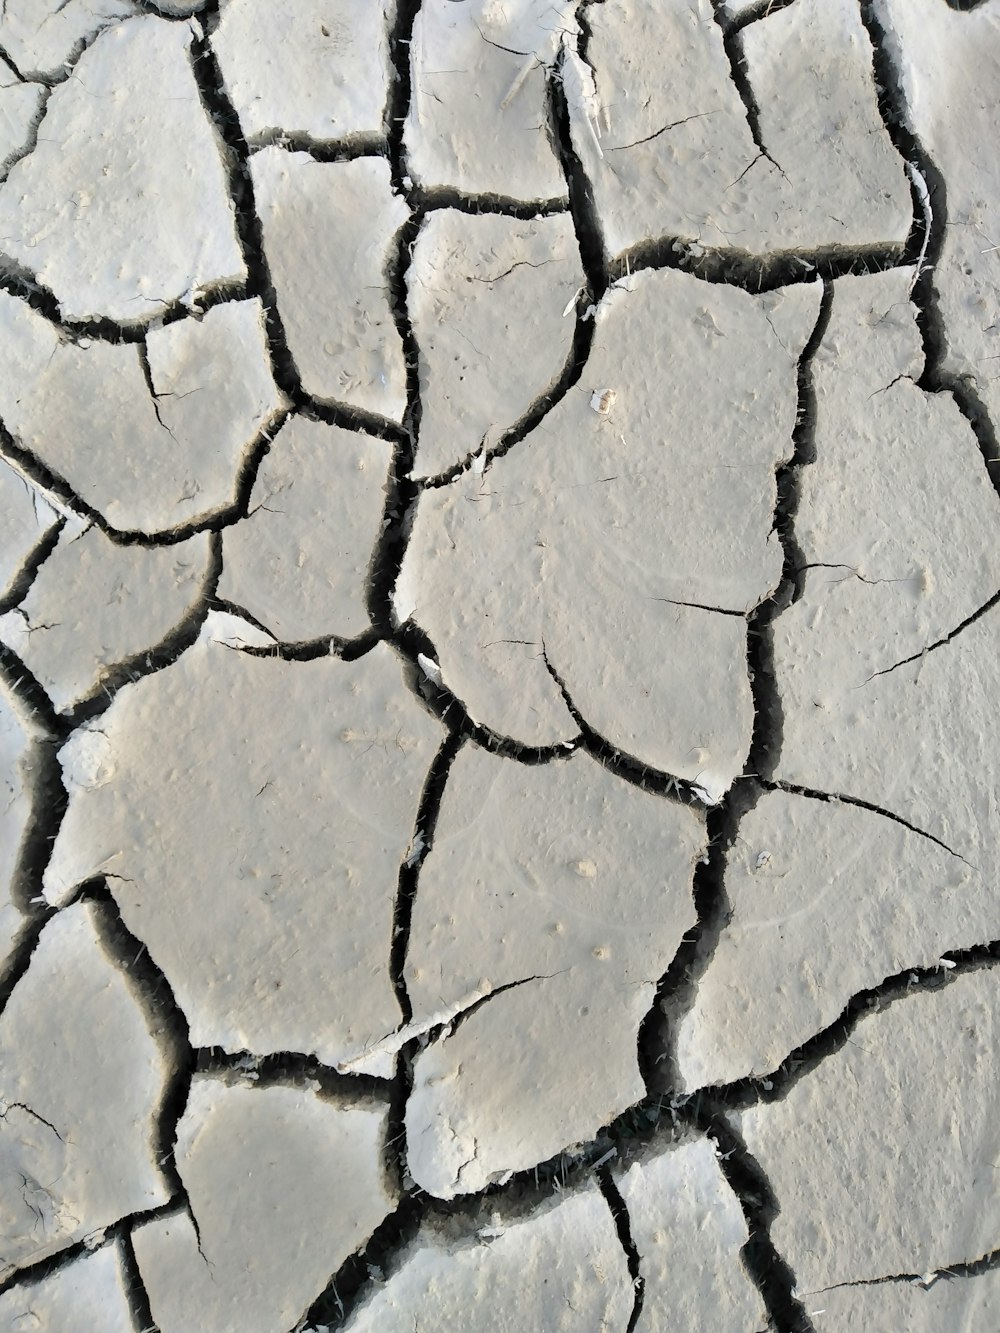 a crack in the ground that has been cracked